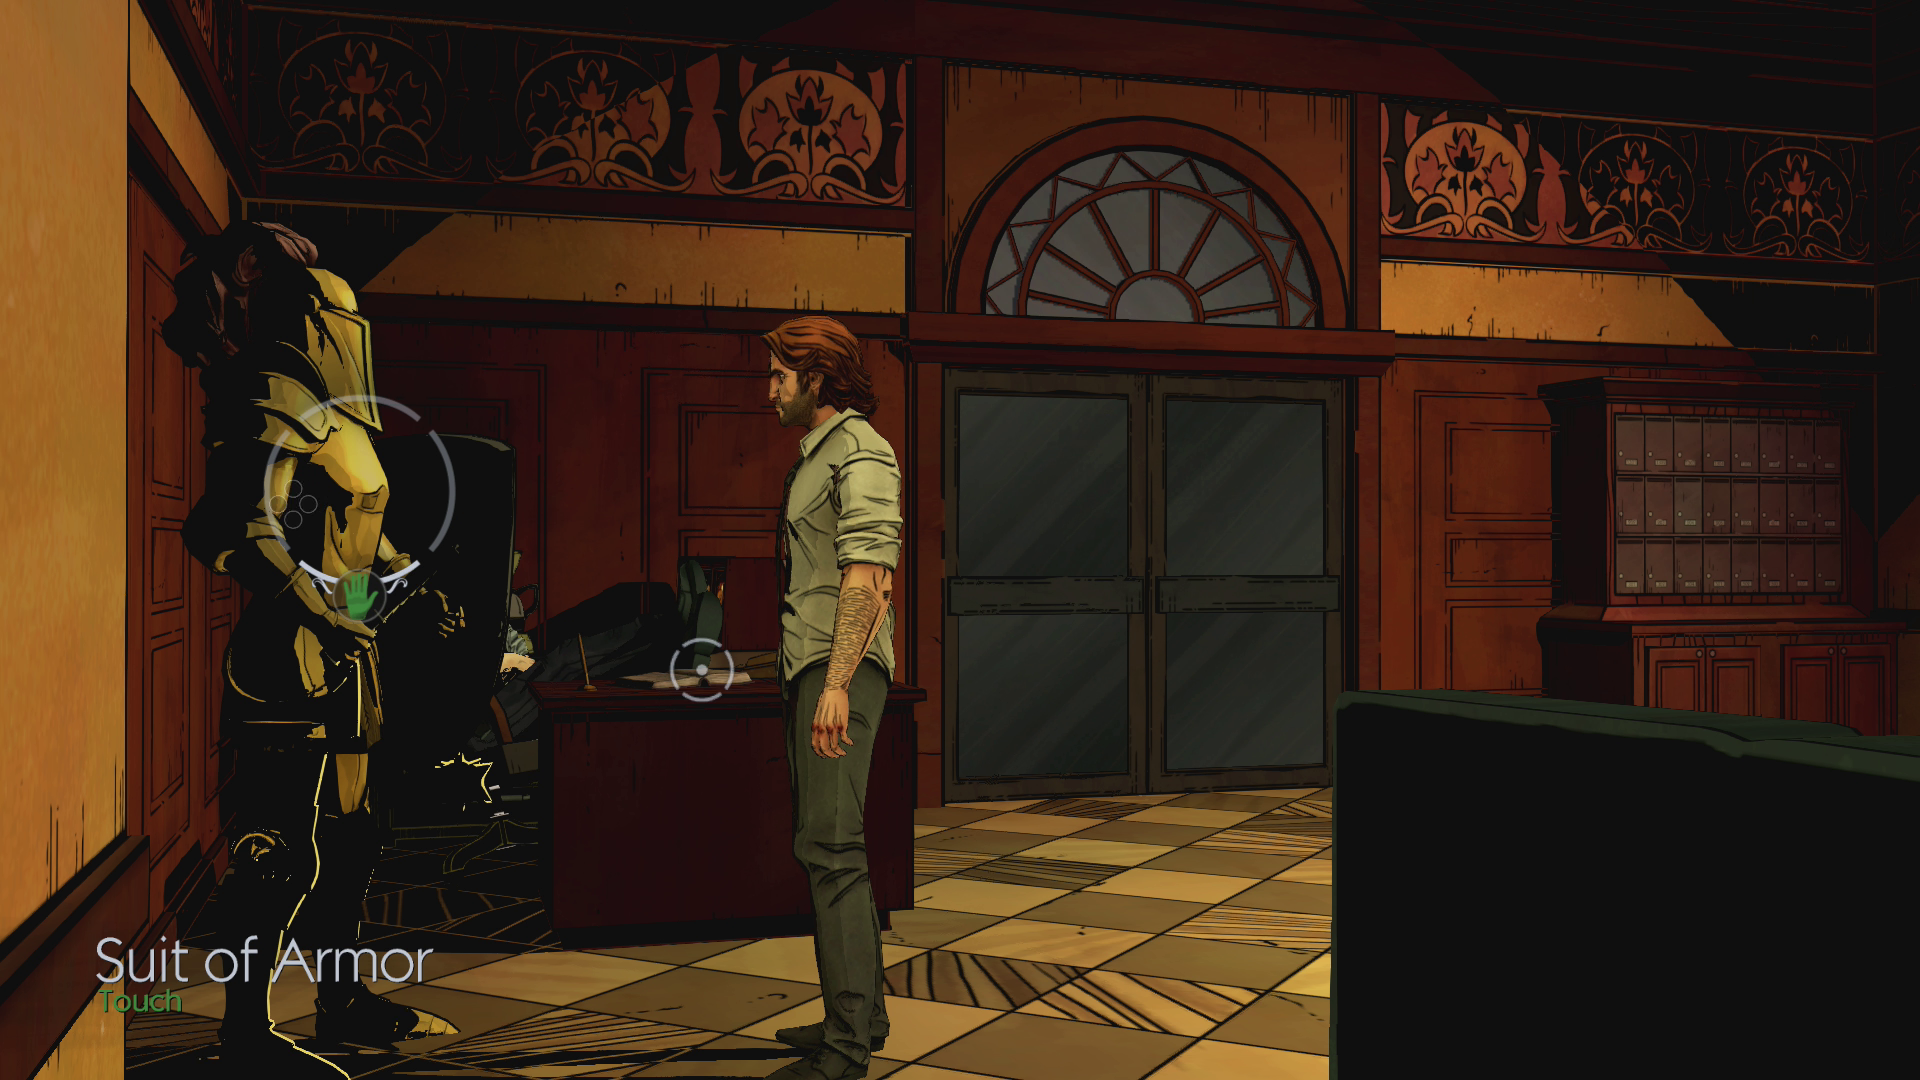 The Wolf Among Us on